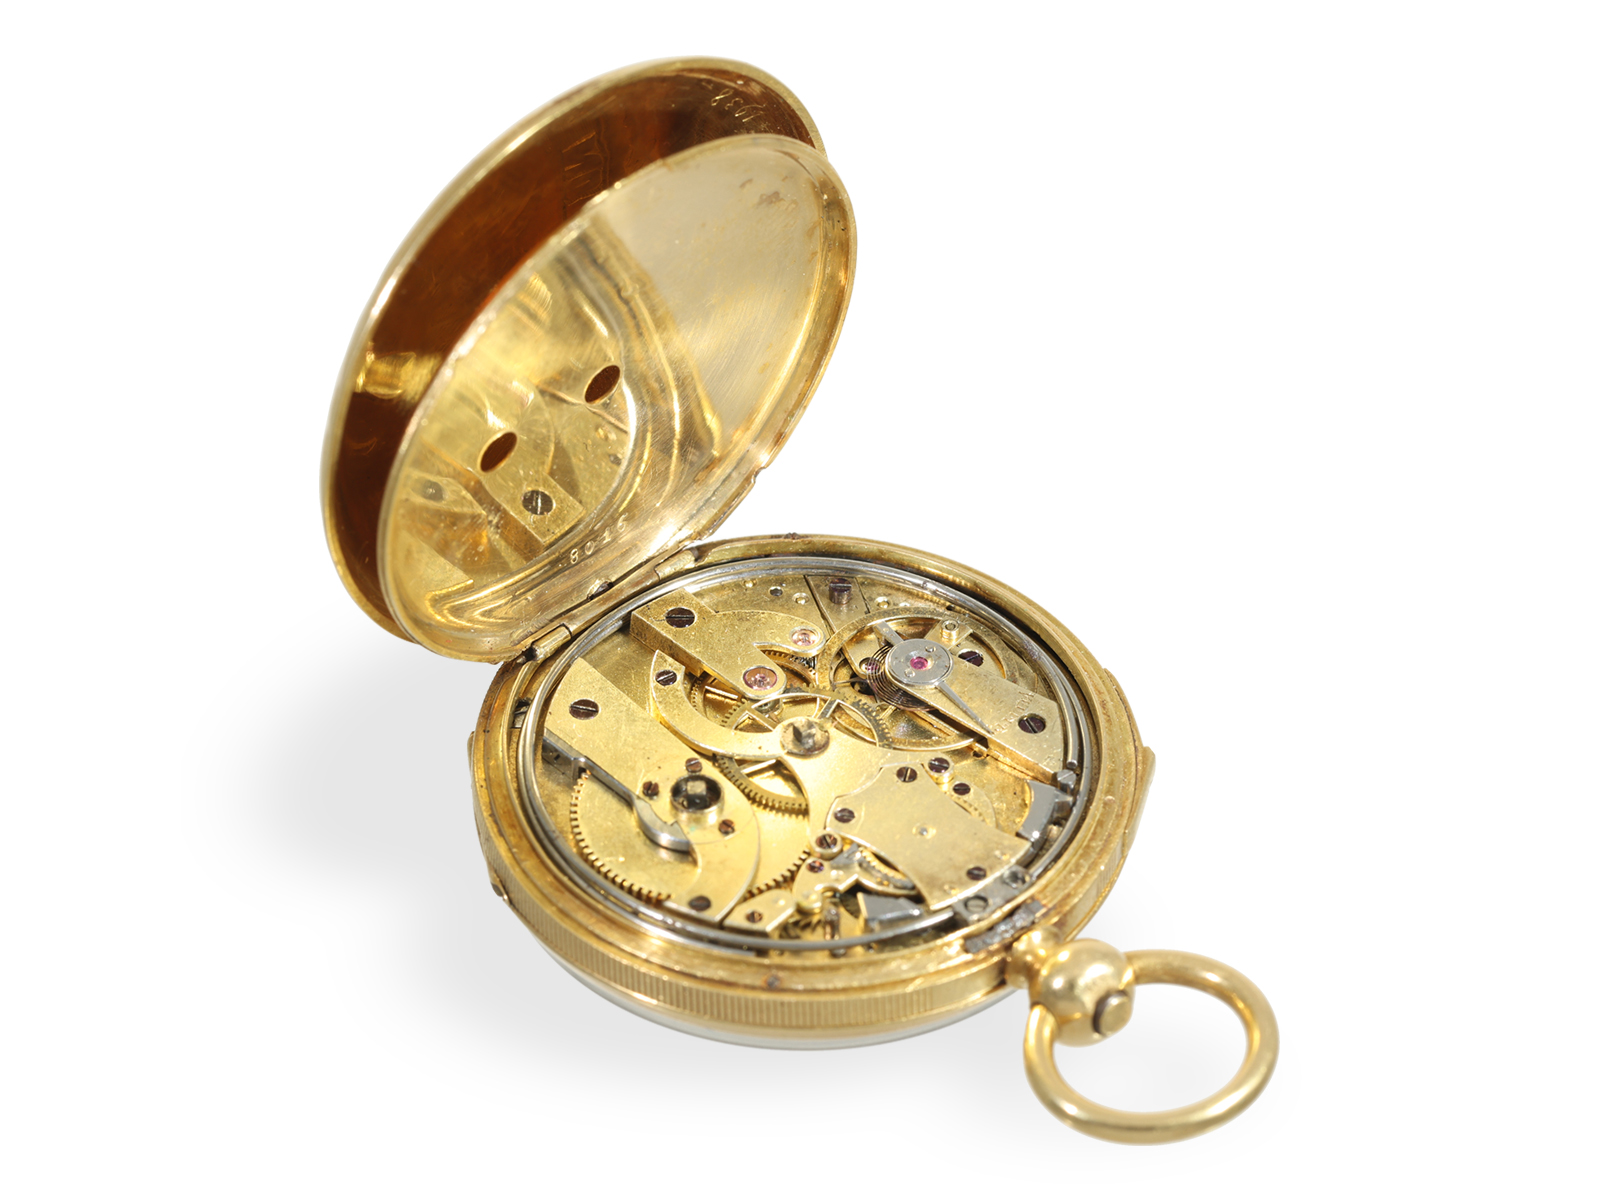 Pocket watch: very rare ladies' pocket watch with repeater, Jeannot Droz a Besancon ca. 1850 - Image 5 of 7